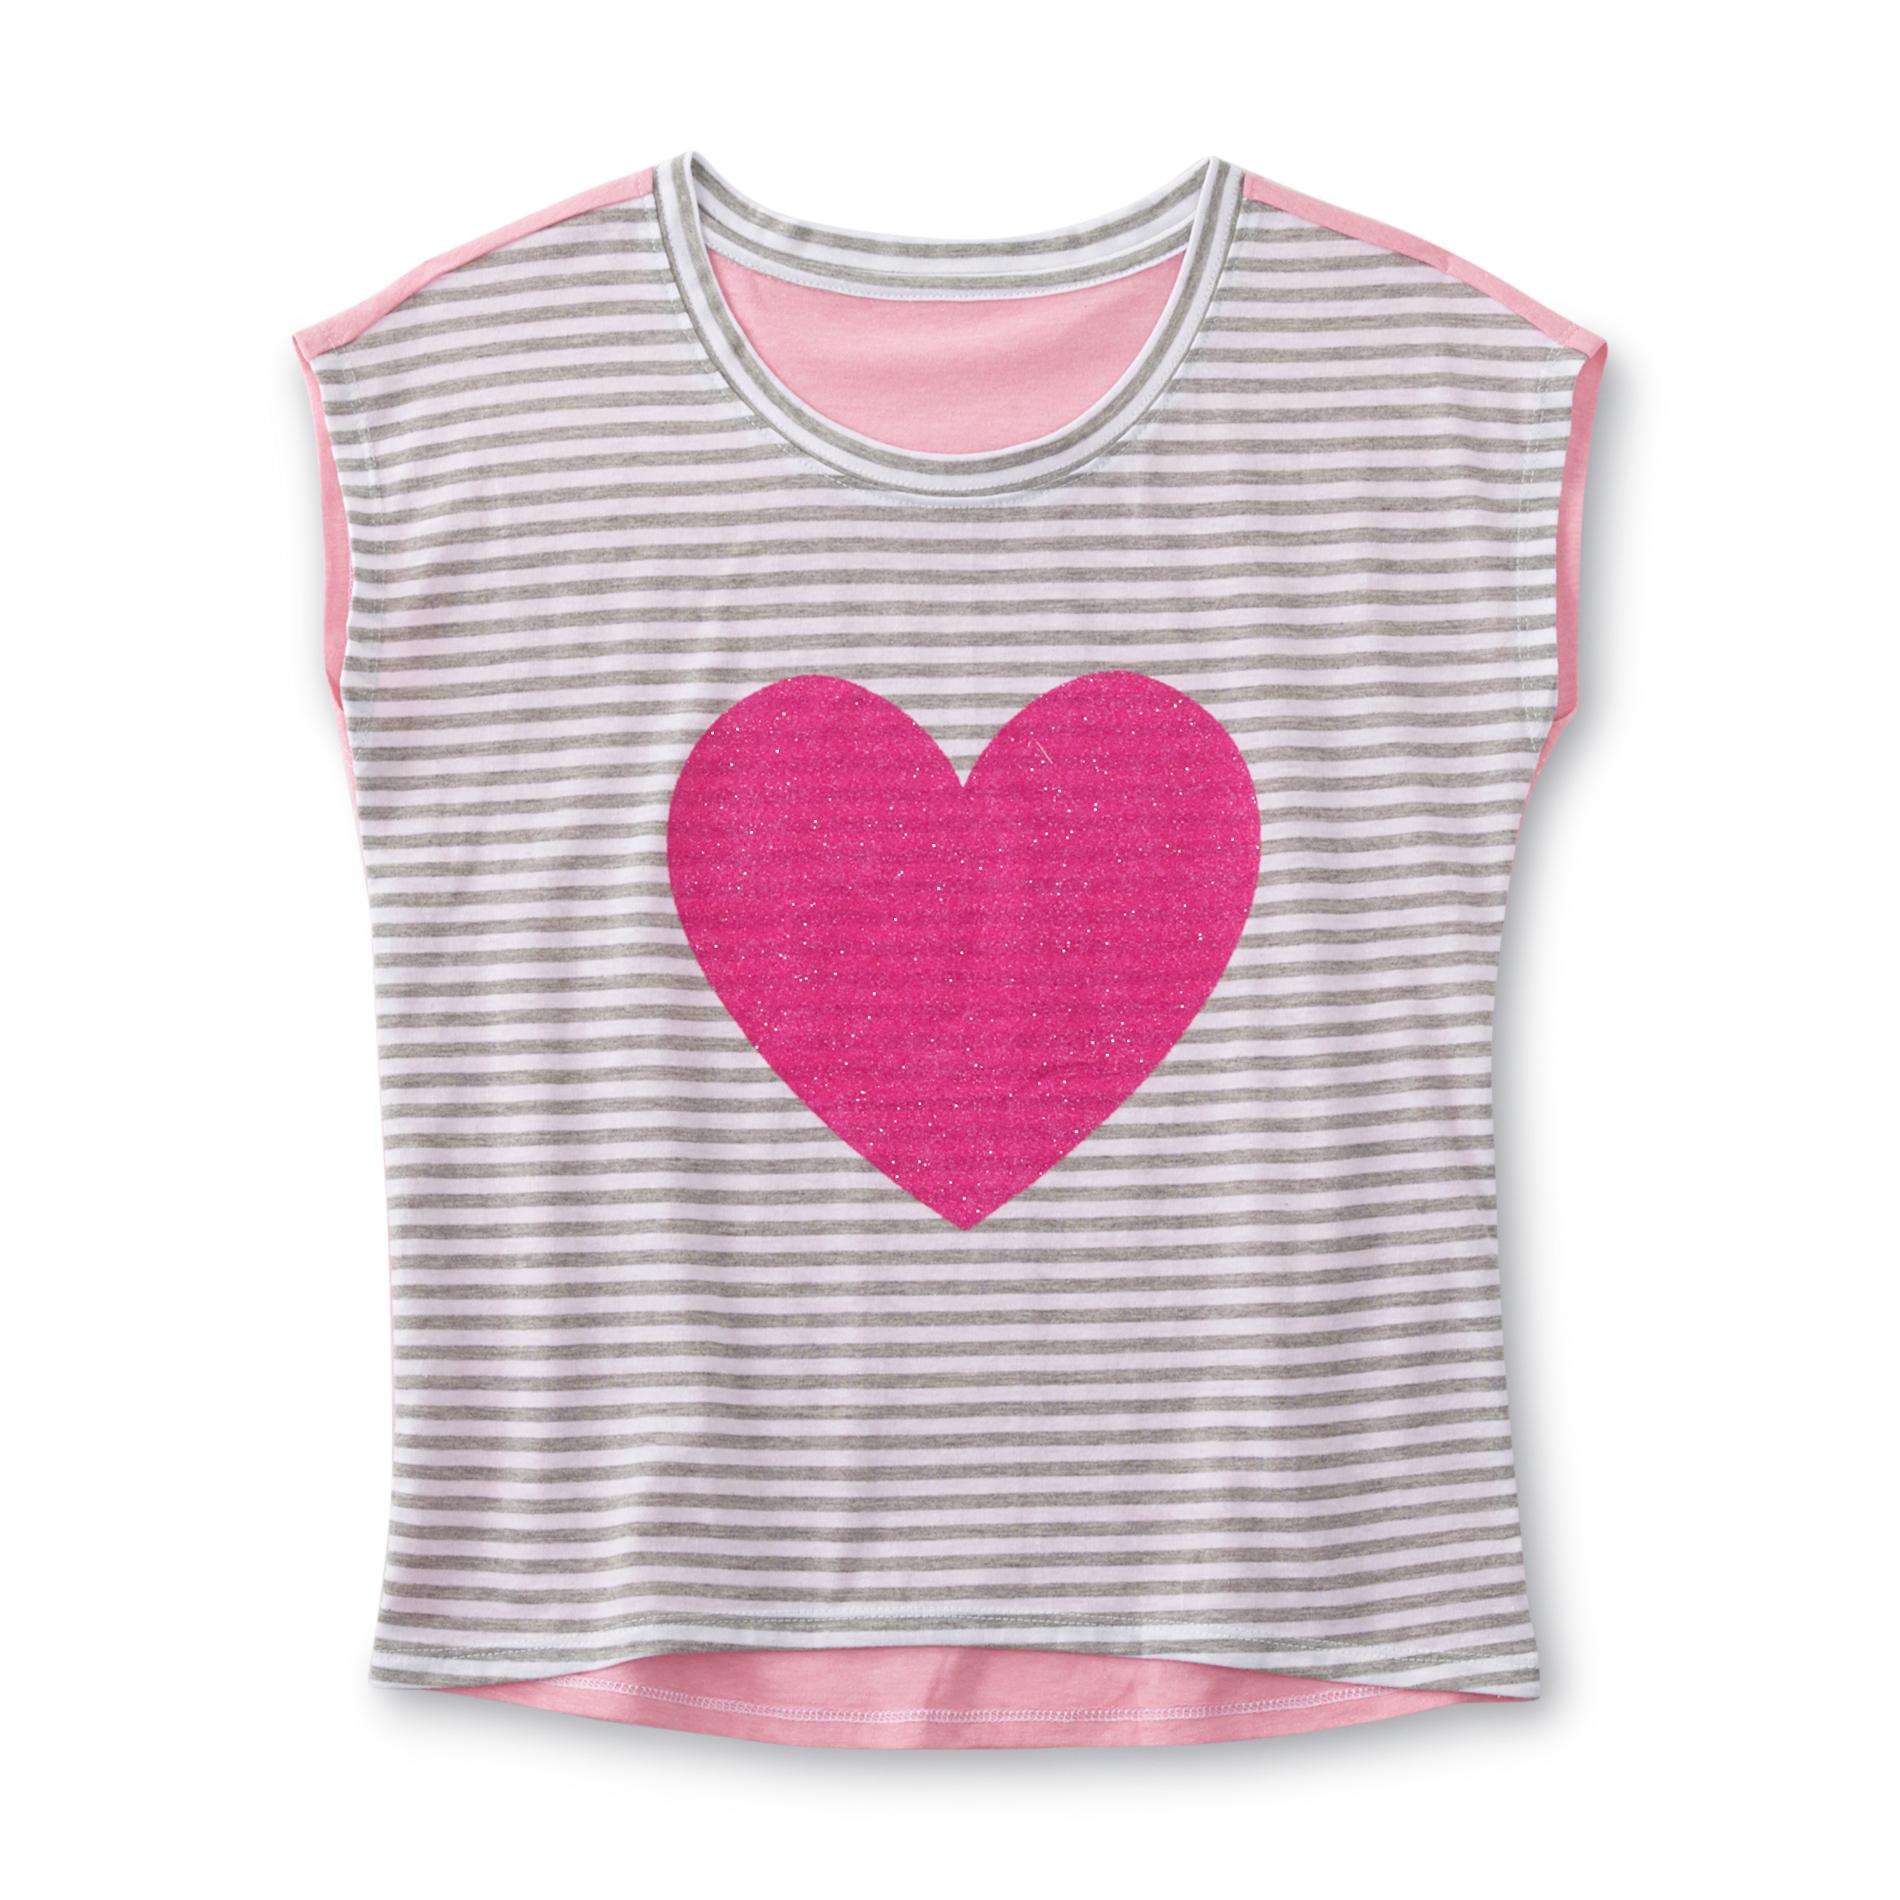 Girl's Graphic T-Shirt - Heart & Striped